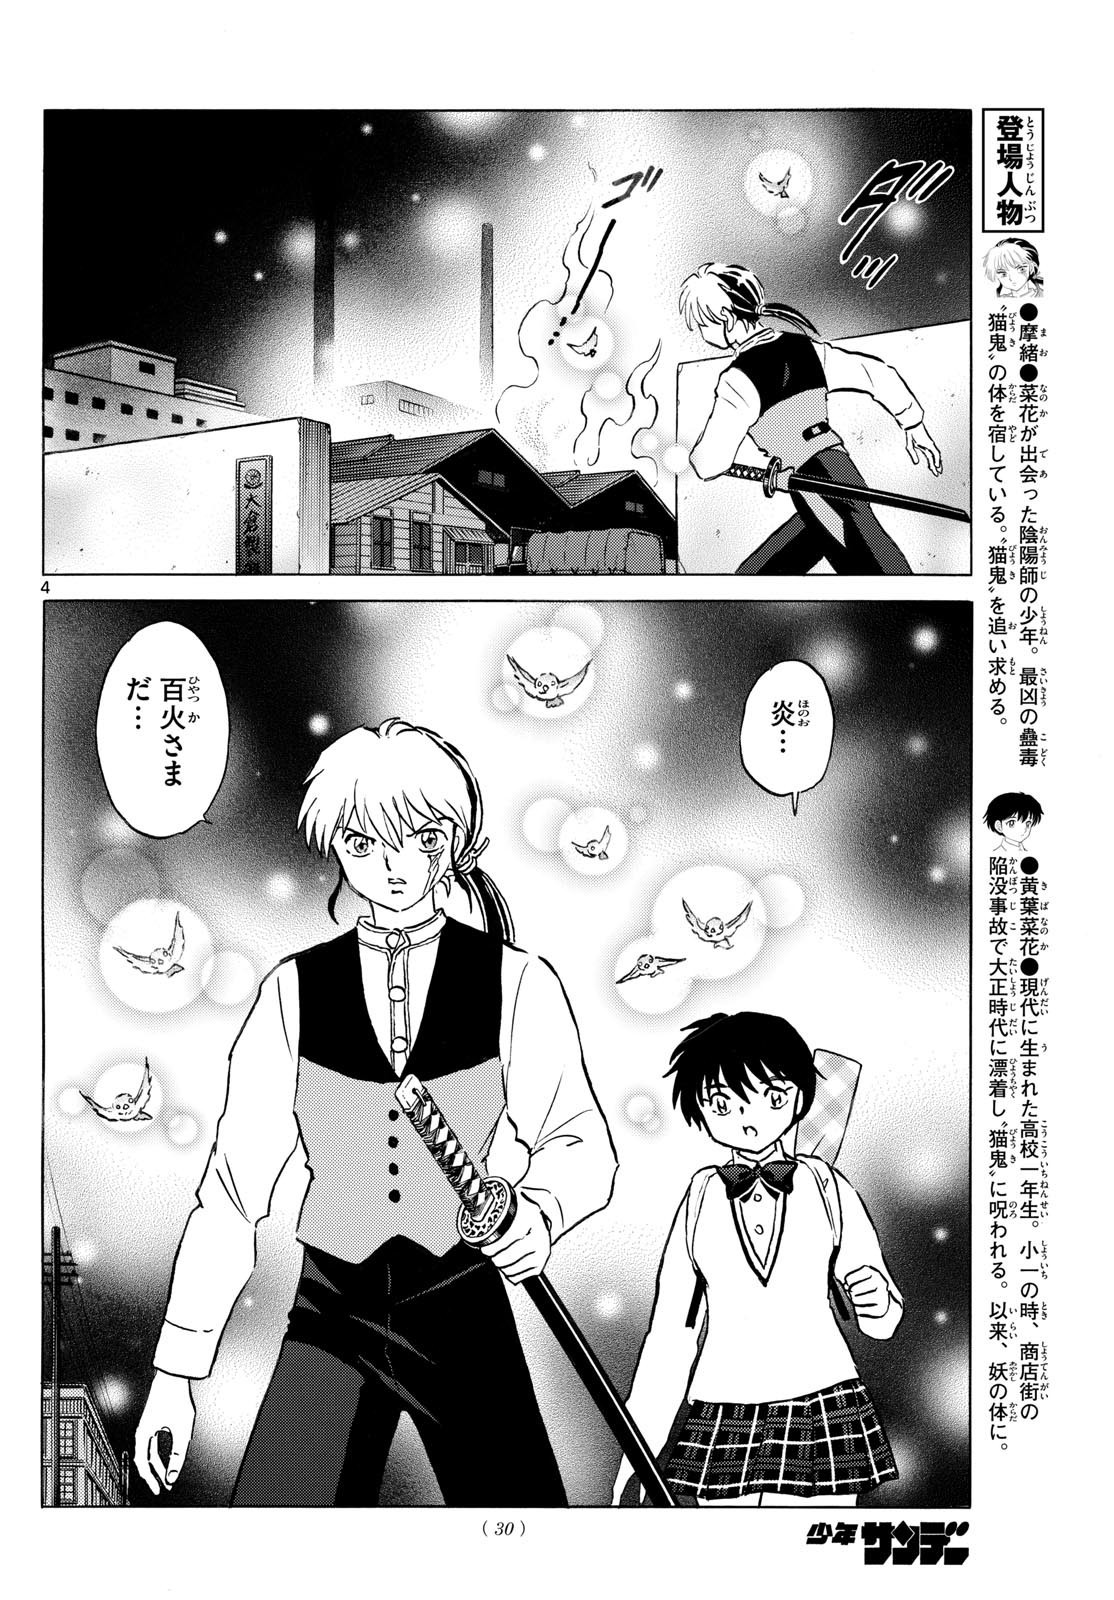 MAO - Chapter 235 - Page 4